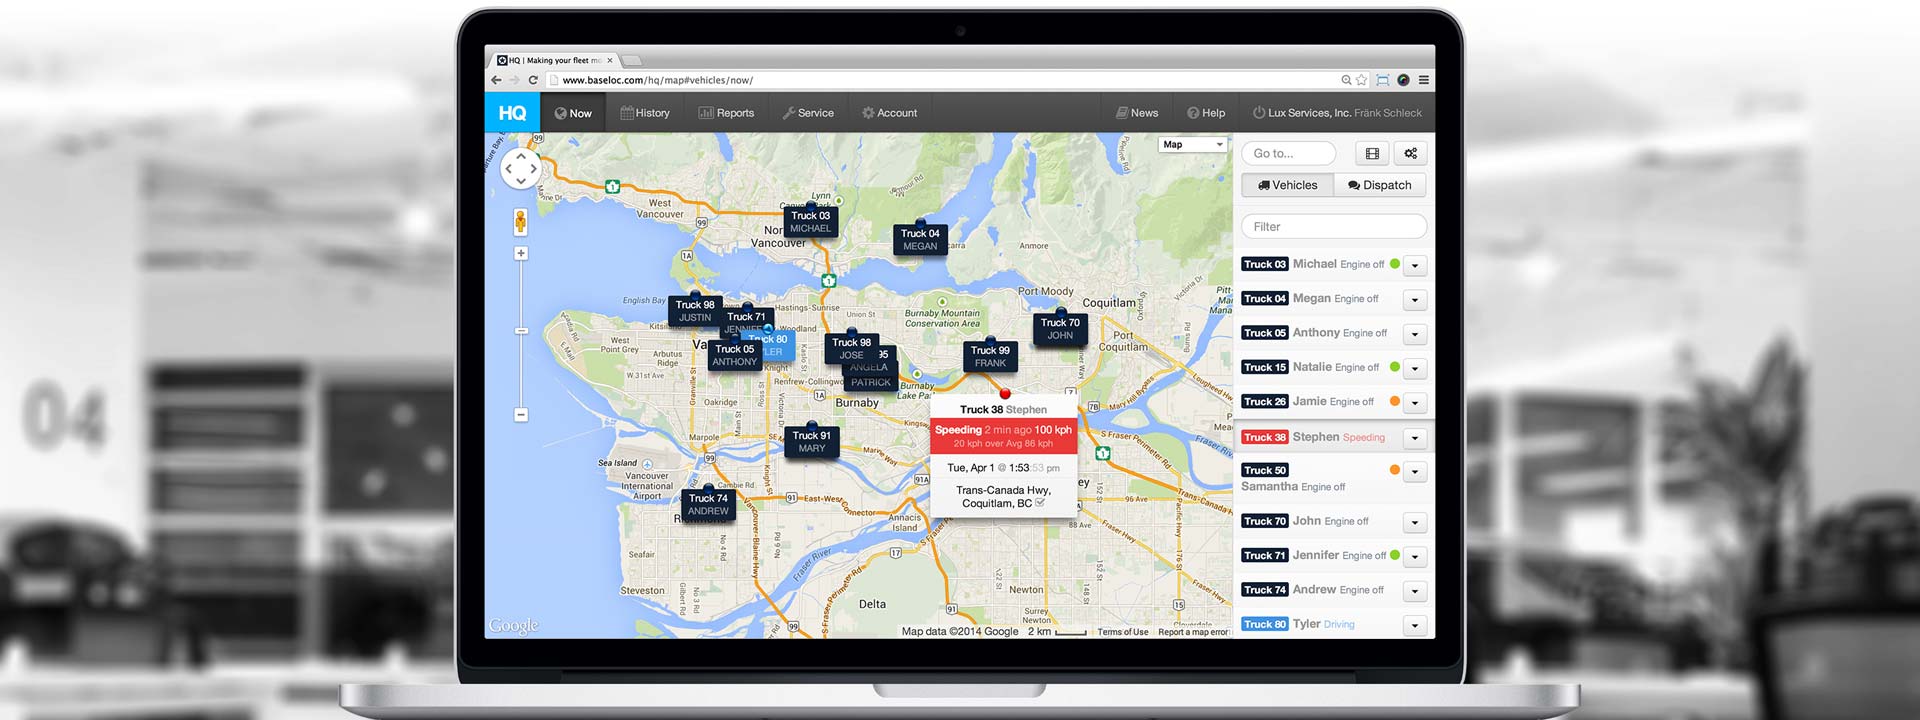 10 Best Devices and Fleet Management Software for 2017